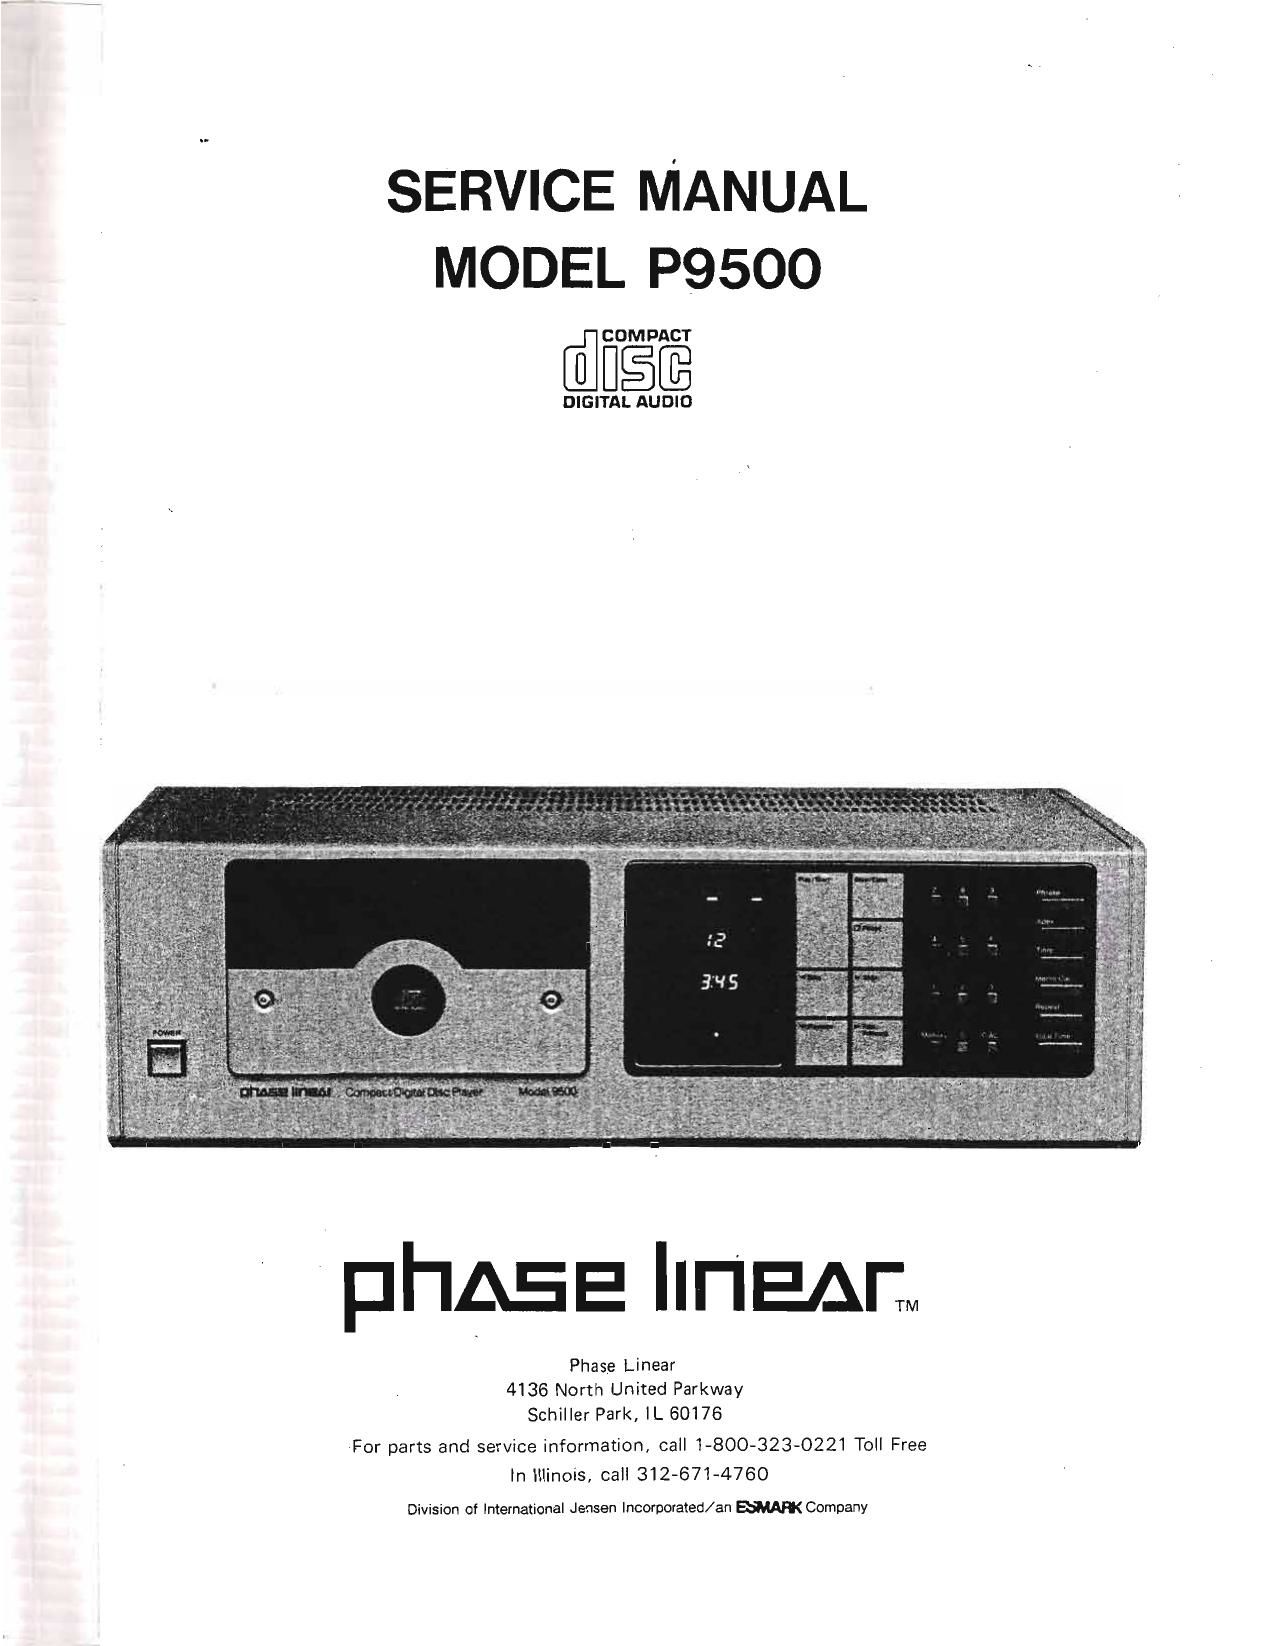 Phase Linear P 9500 Service Manual